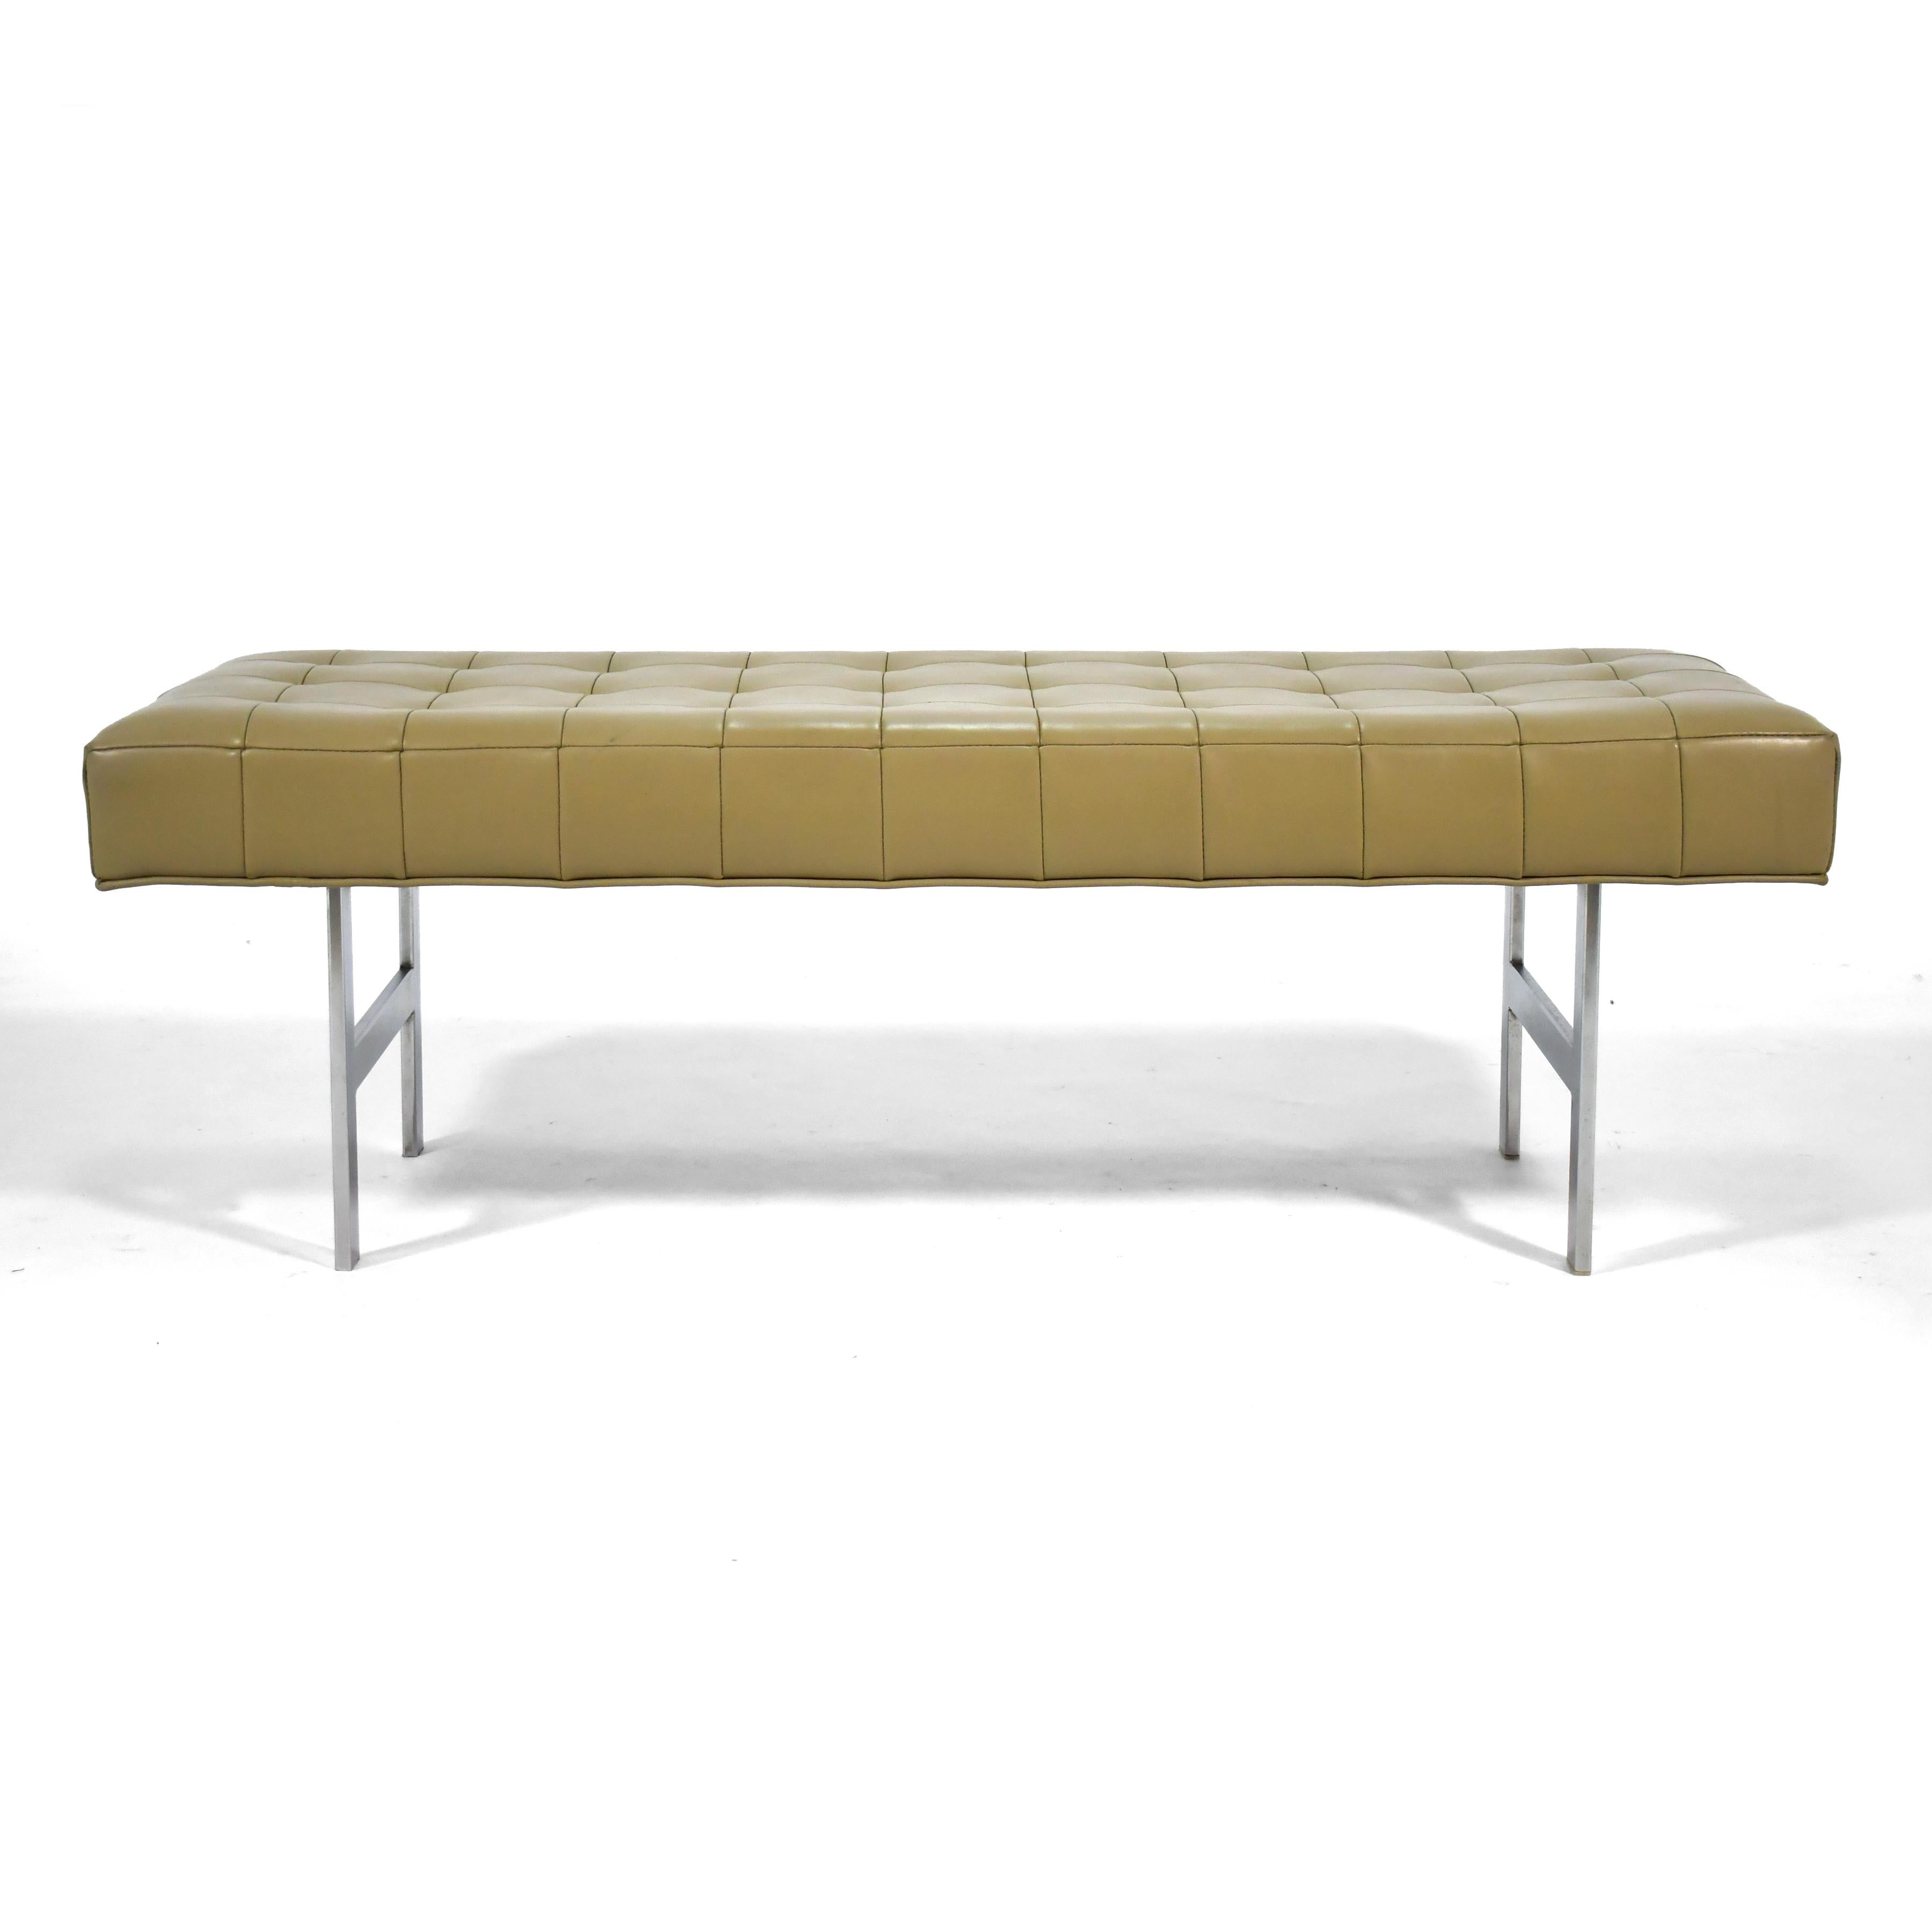 American Mid-Century Modern Upholstered Bench For Sale